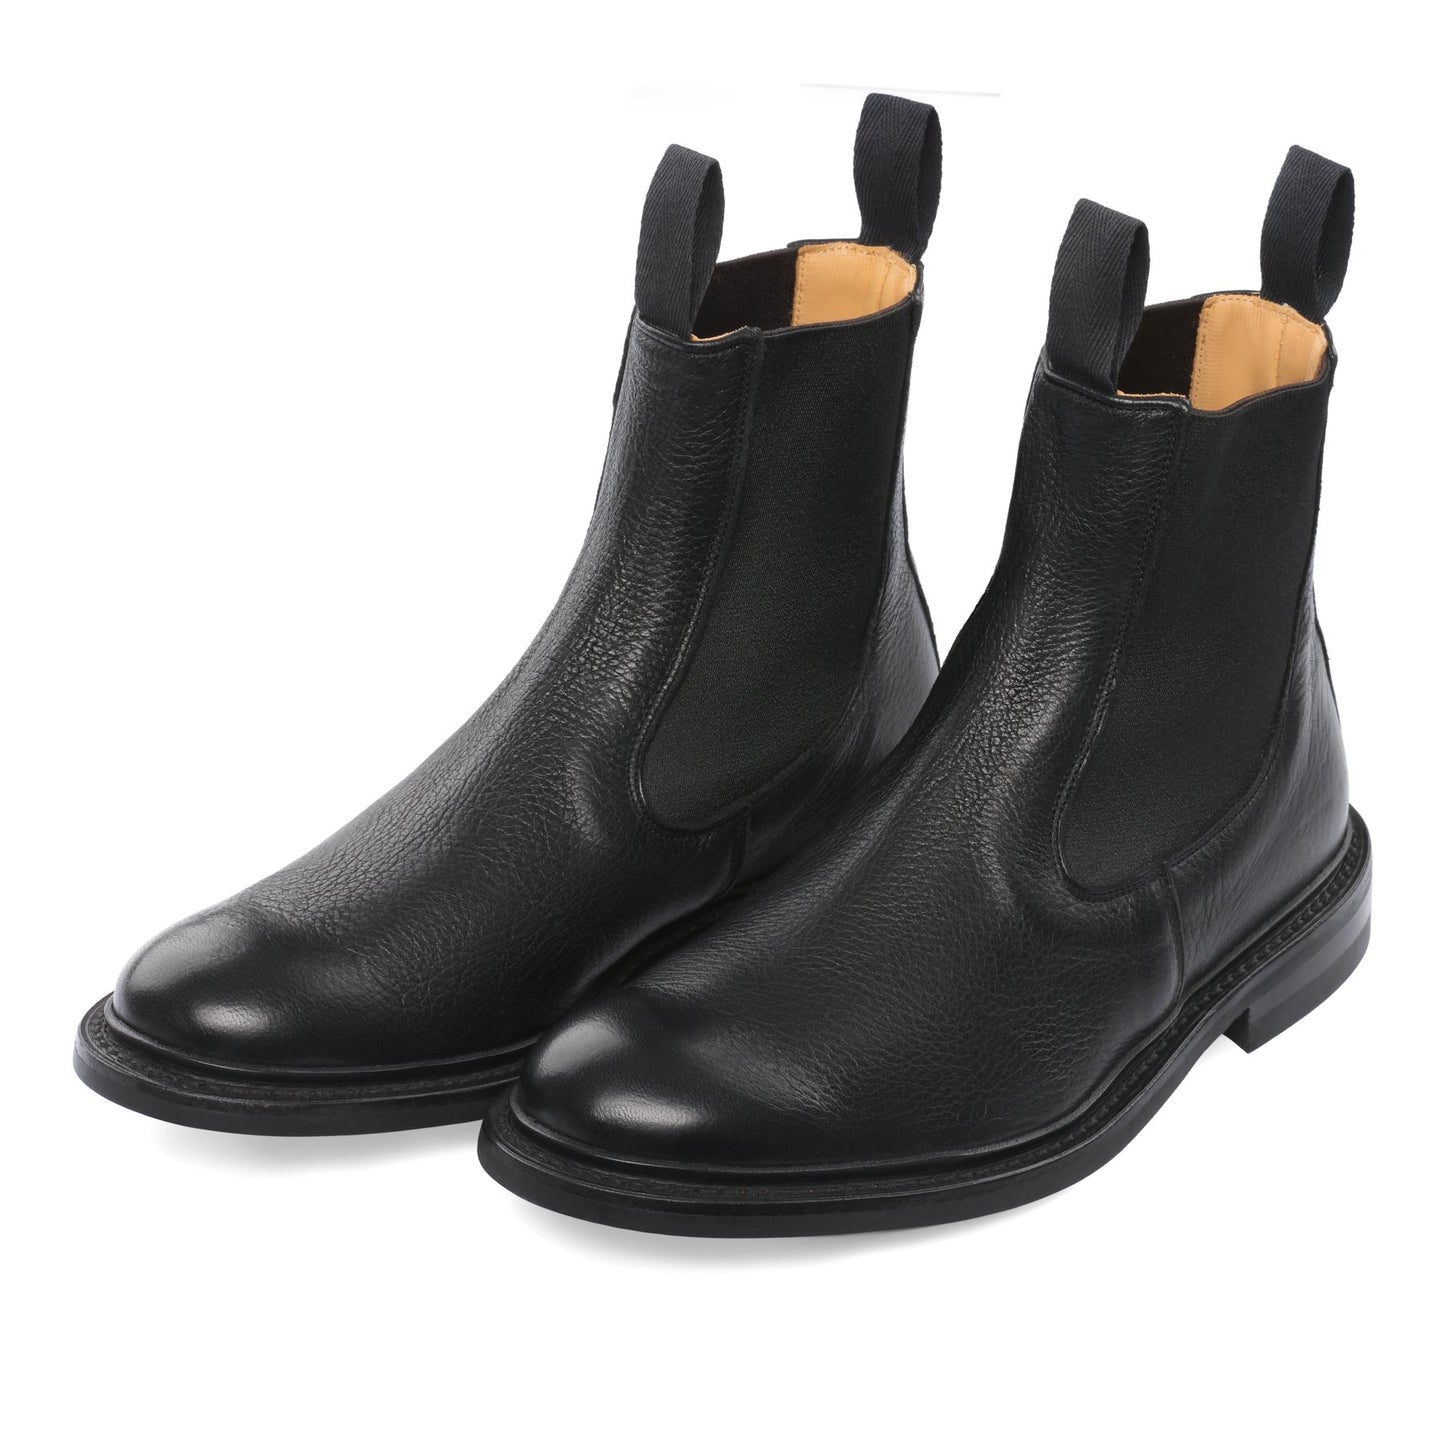 Tricker's "Stephen" Leather Chelsea Boots in Black |